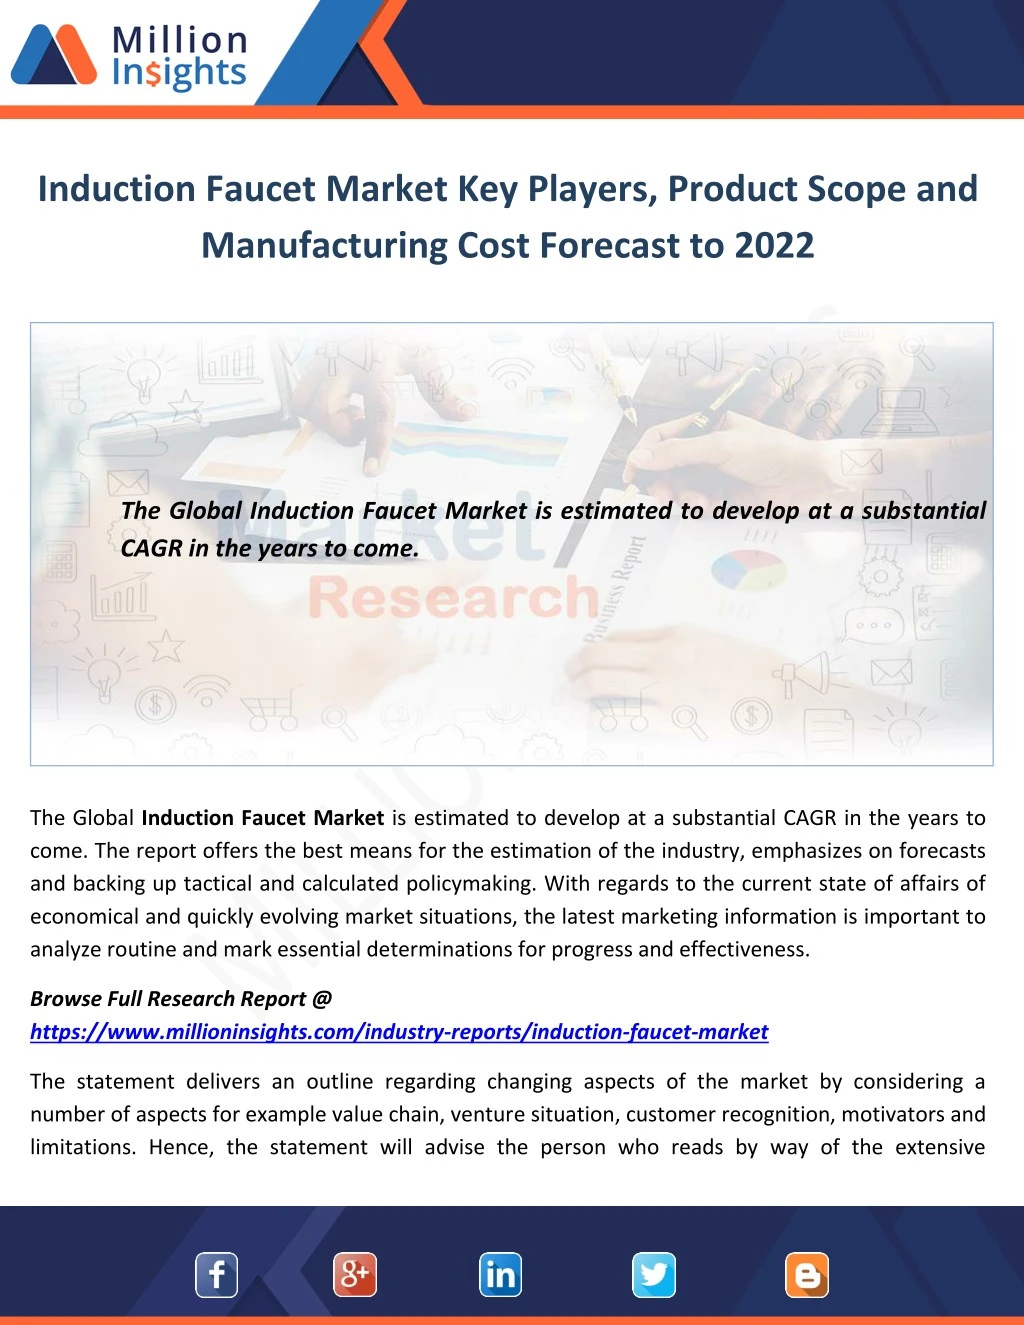 induction faucet market key players product scope